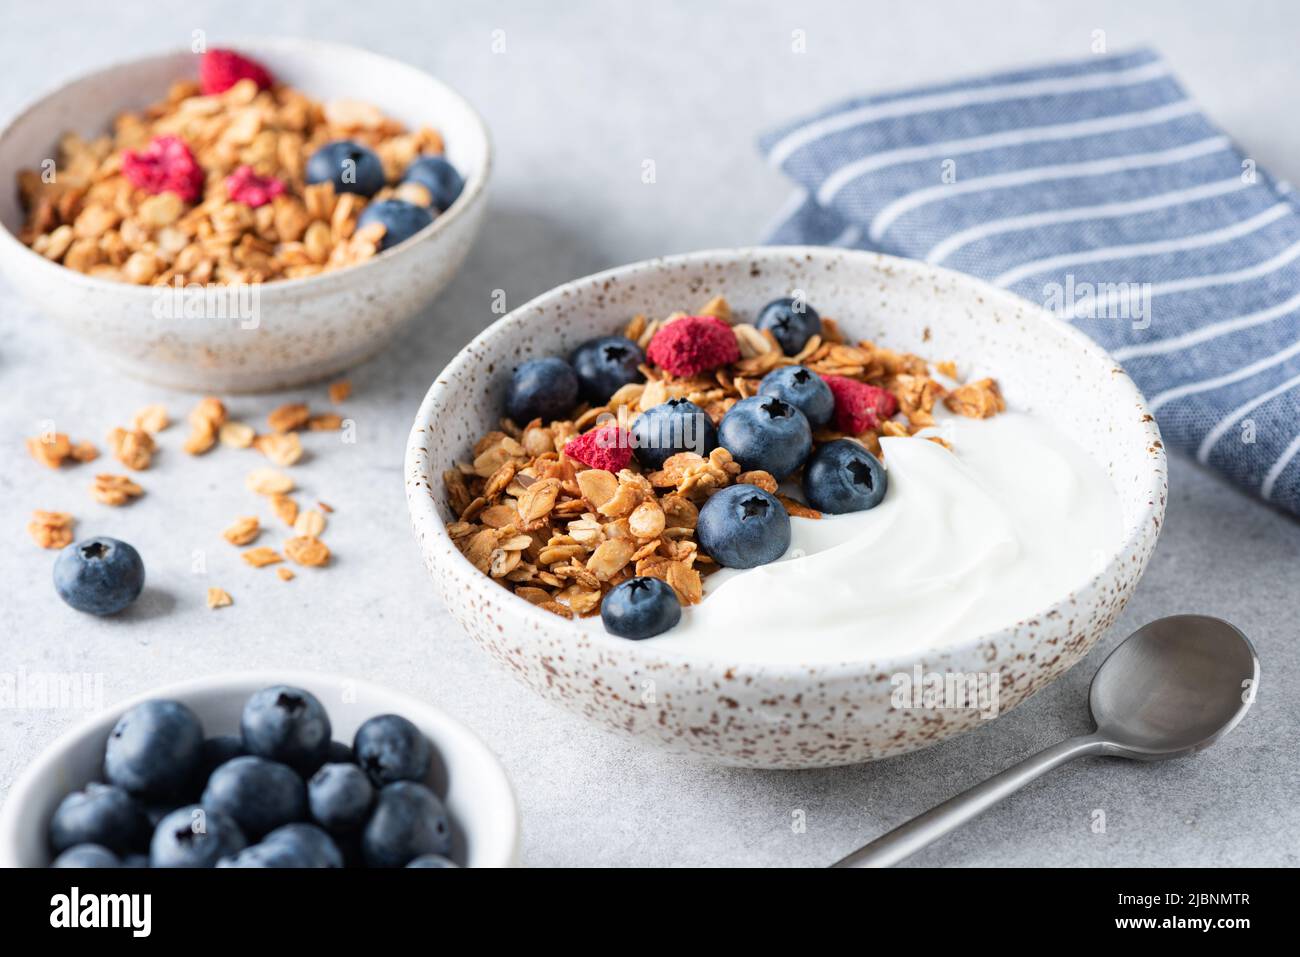 Yogurt bowl with granola and blueberries. Healthy breakfast or snack, rich in protein, fiber and calcium Stock Photo